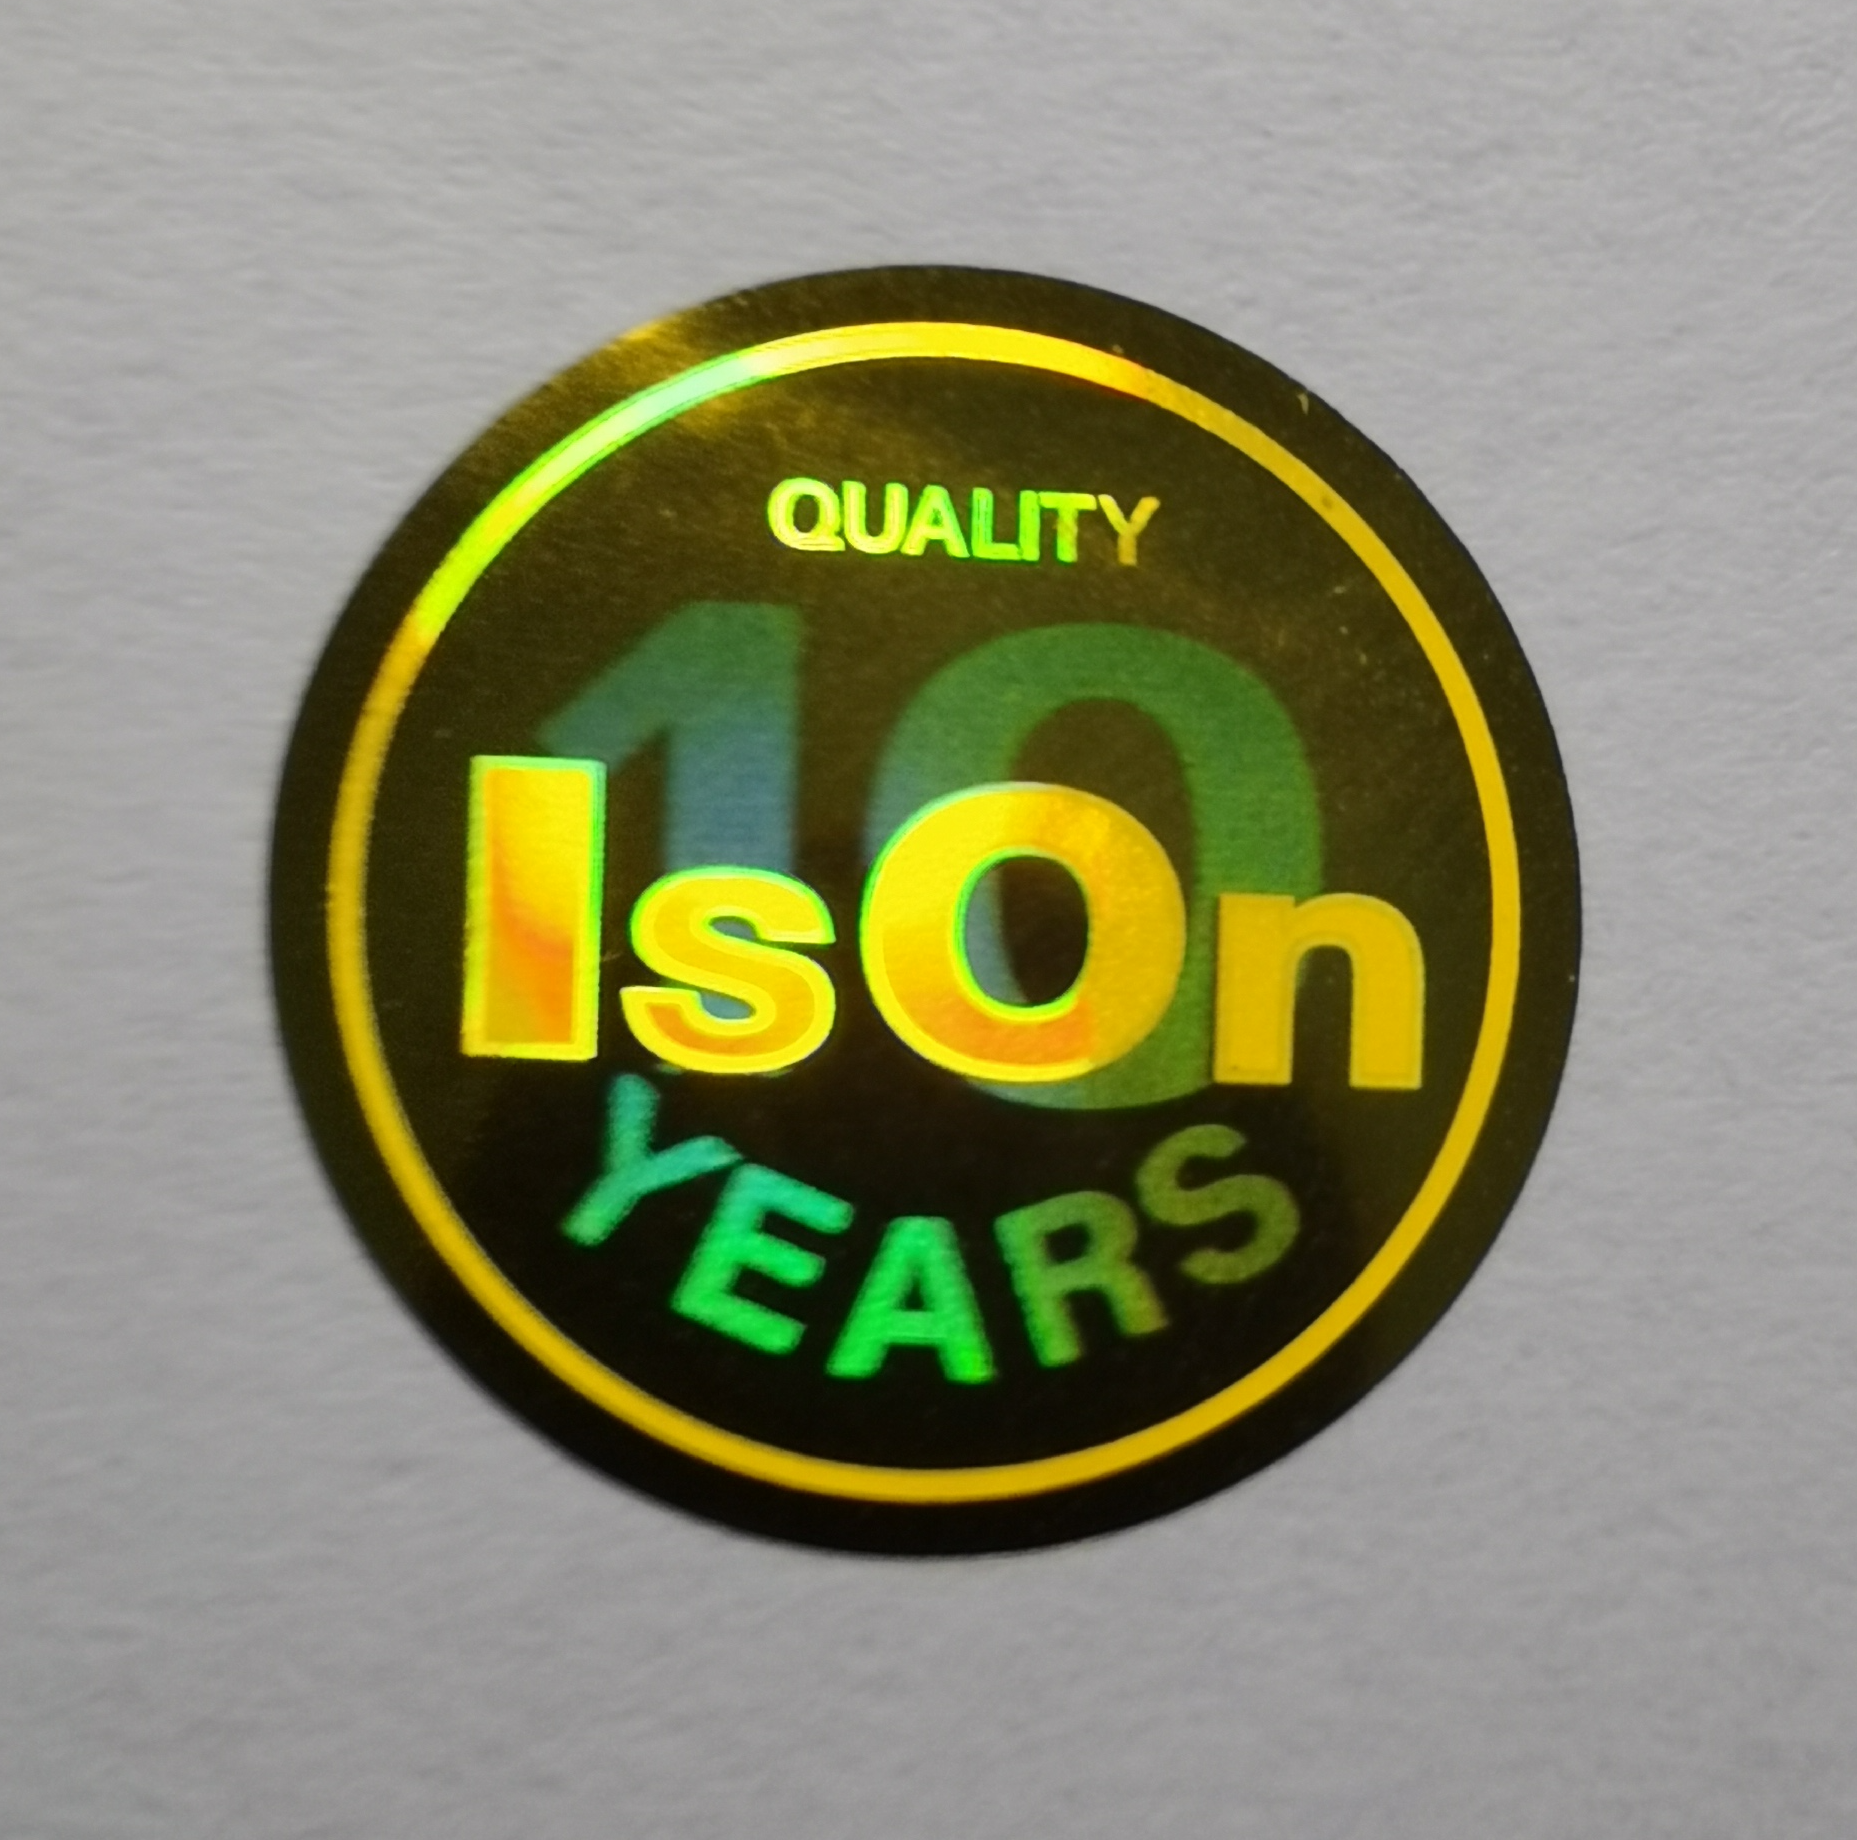 Metal product identification plate holographic label